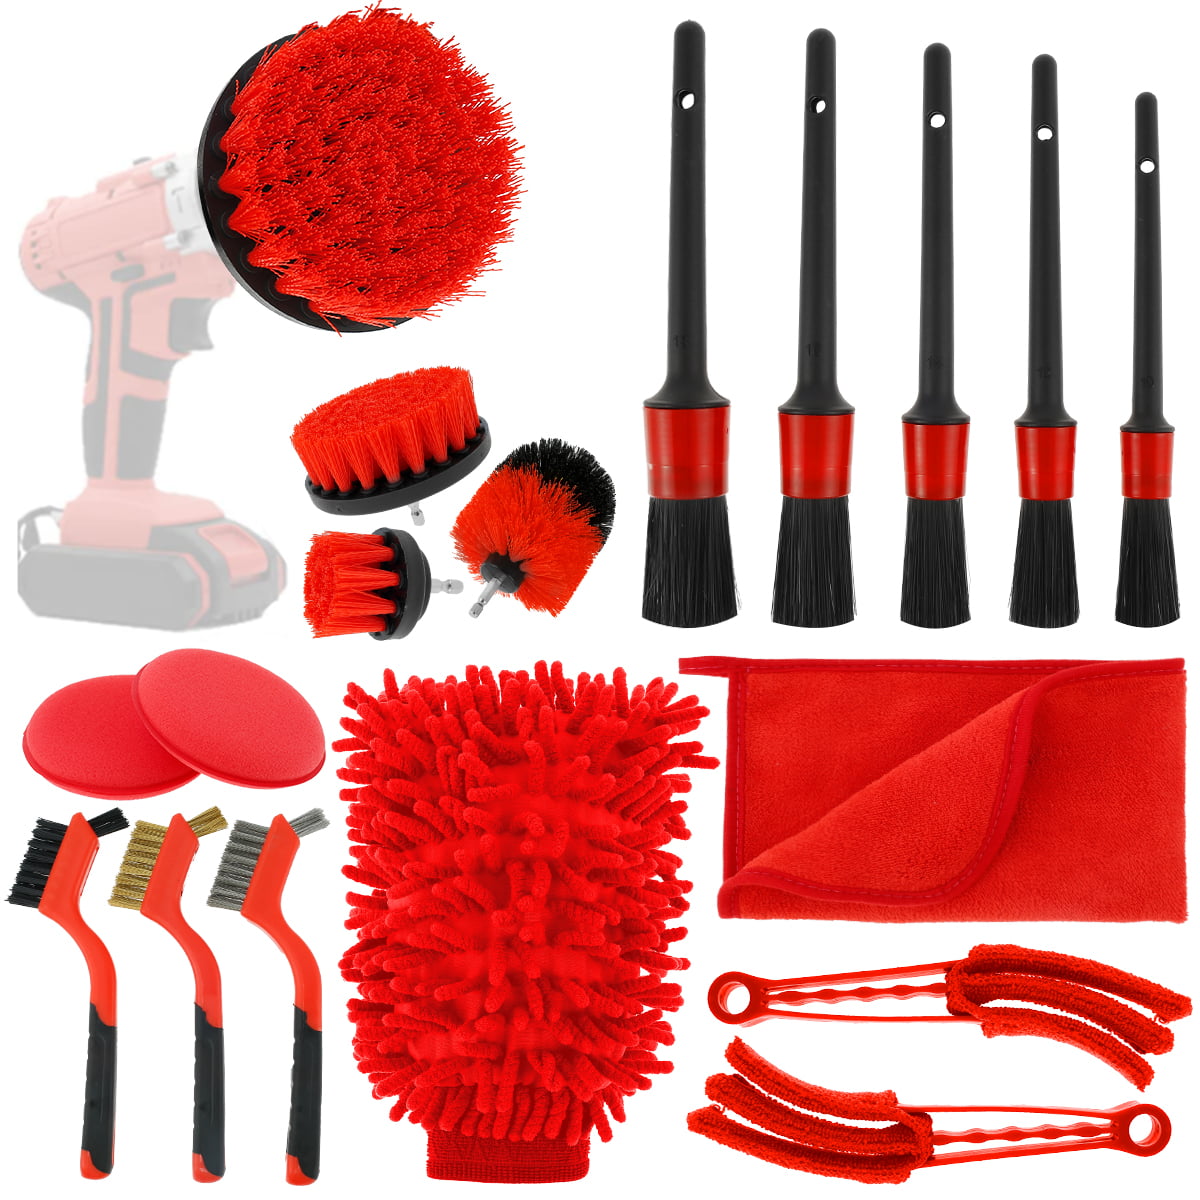 Air Vents Dashboard Car Cleaning Tools Kit Driller Attachment Set & All Purpose Clean for Cleaning Automobile Interior Wheels Leather Exterior 19 Pcs Car Detailing Brush Set with Carry Bag 